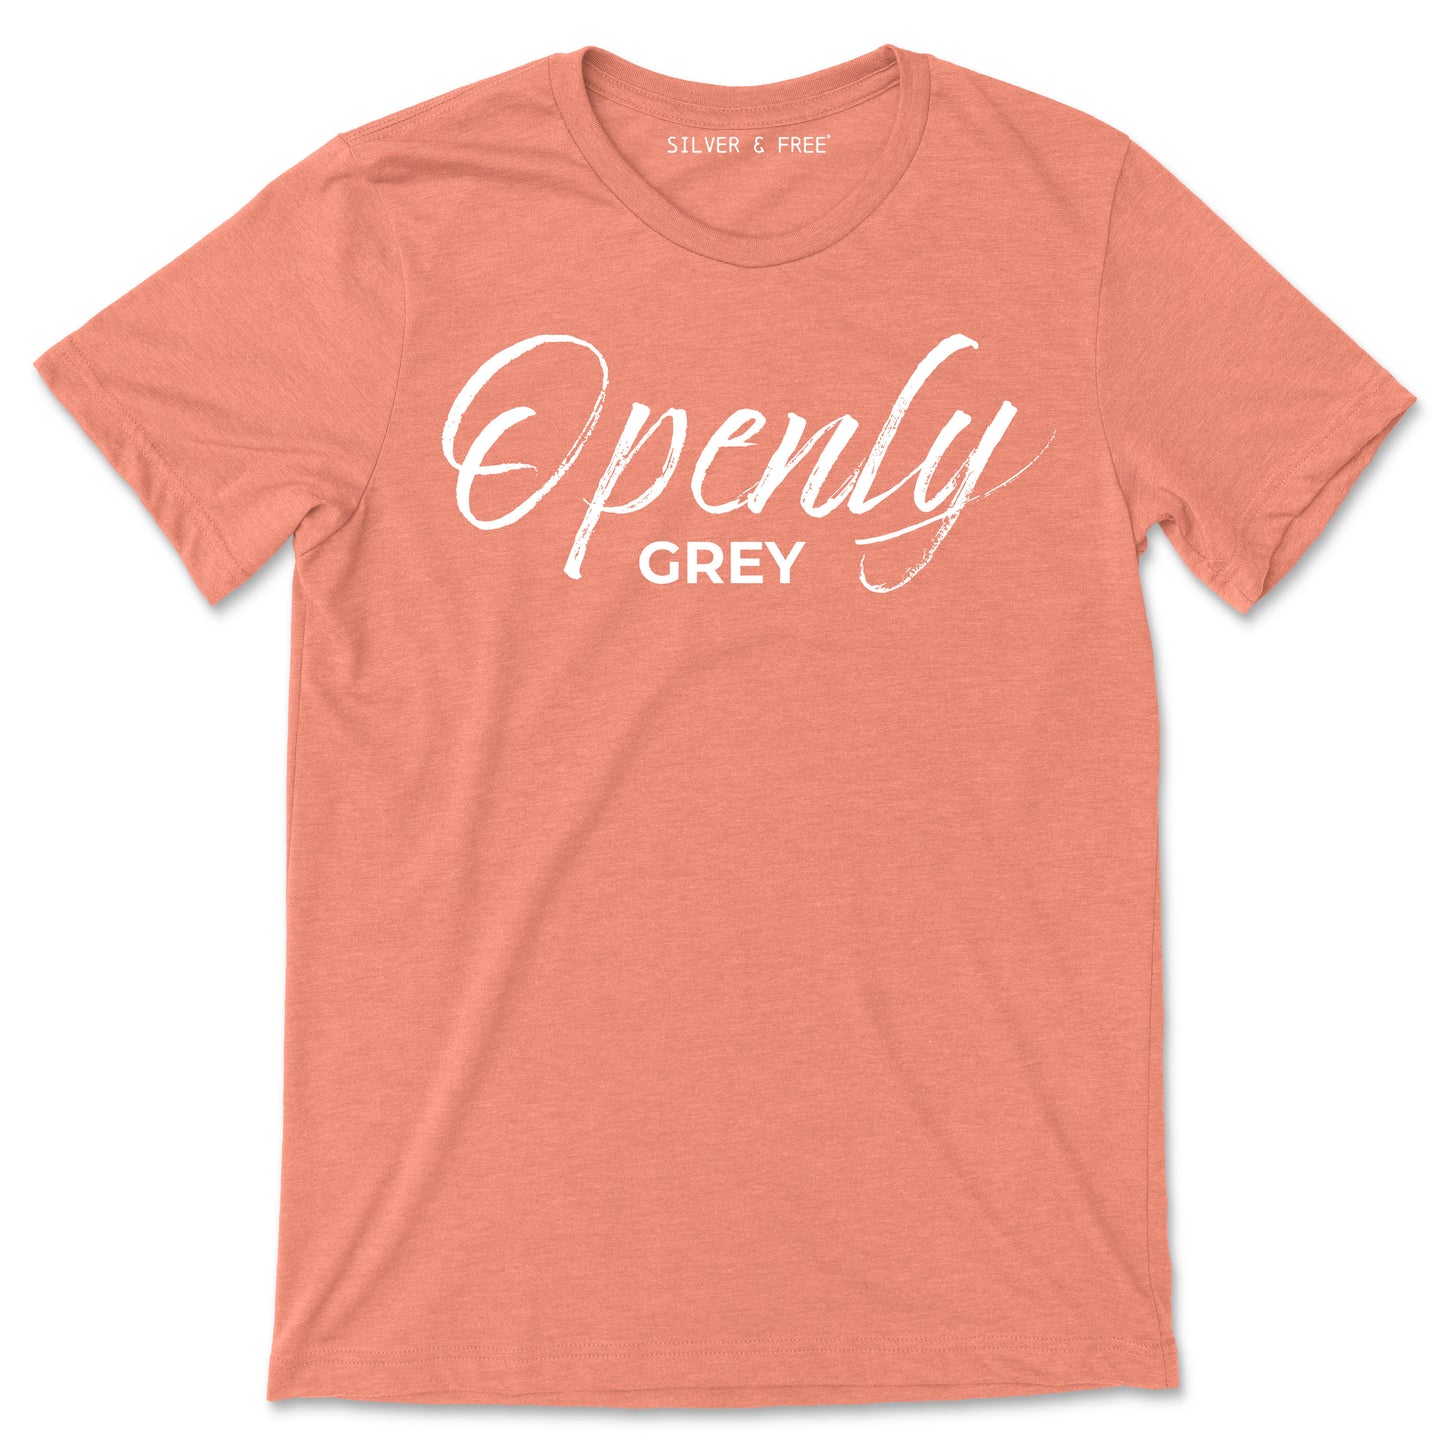 Openly Gray Super Soft Tee - NEW